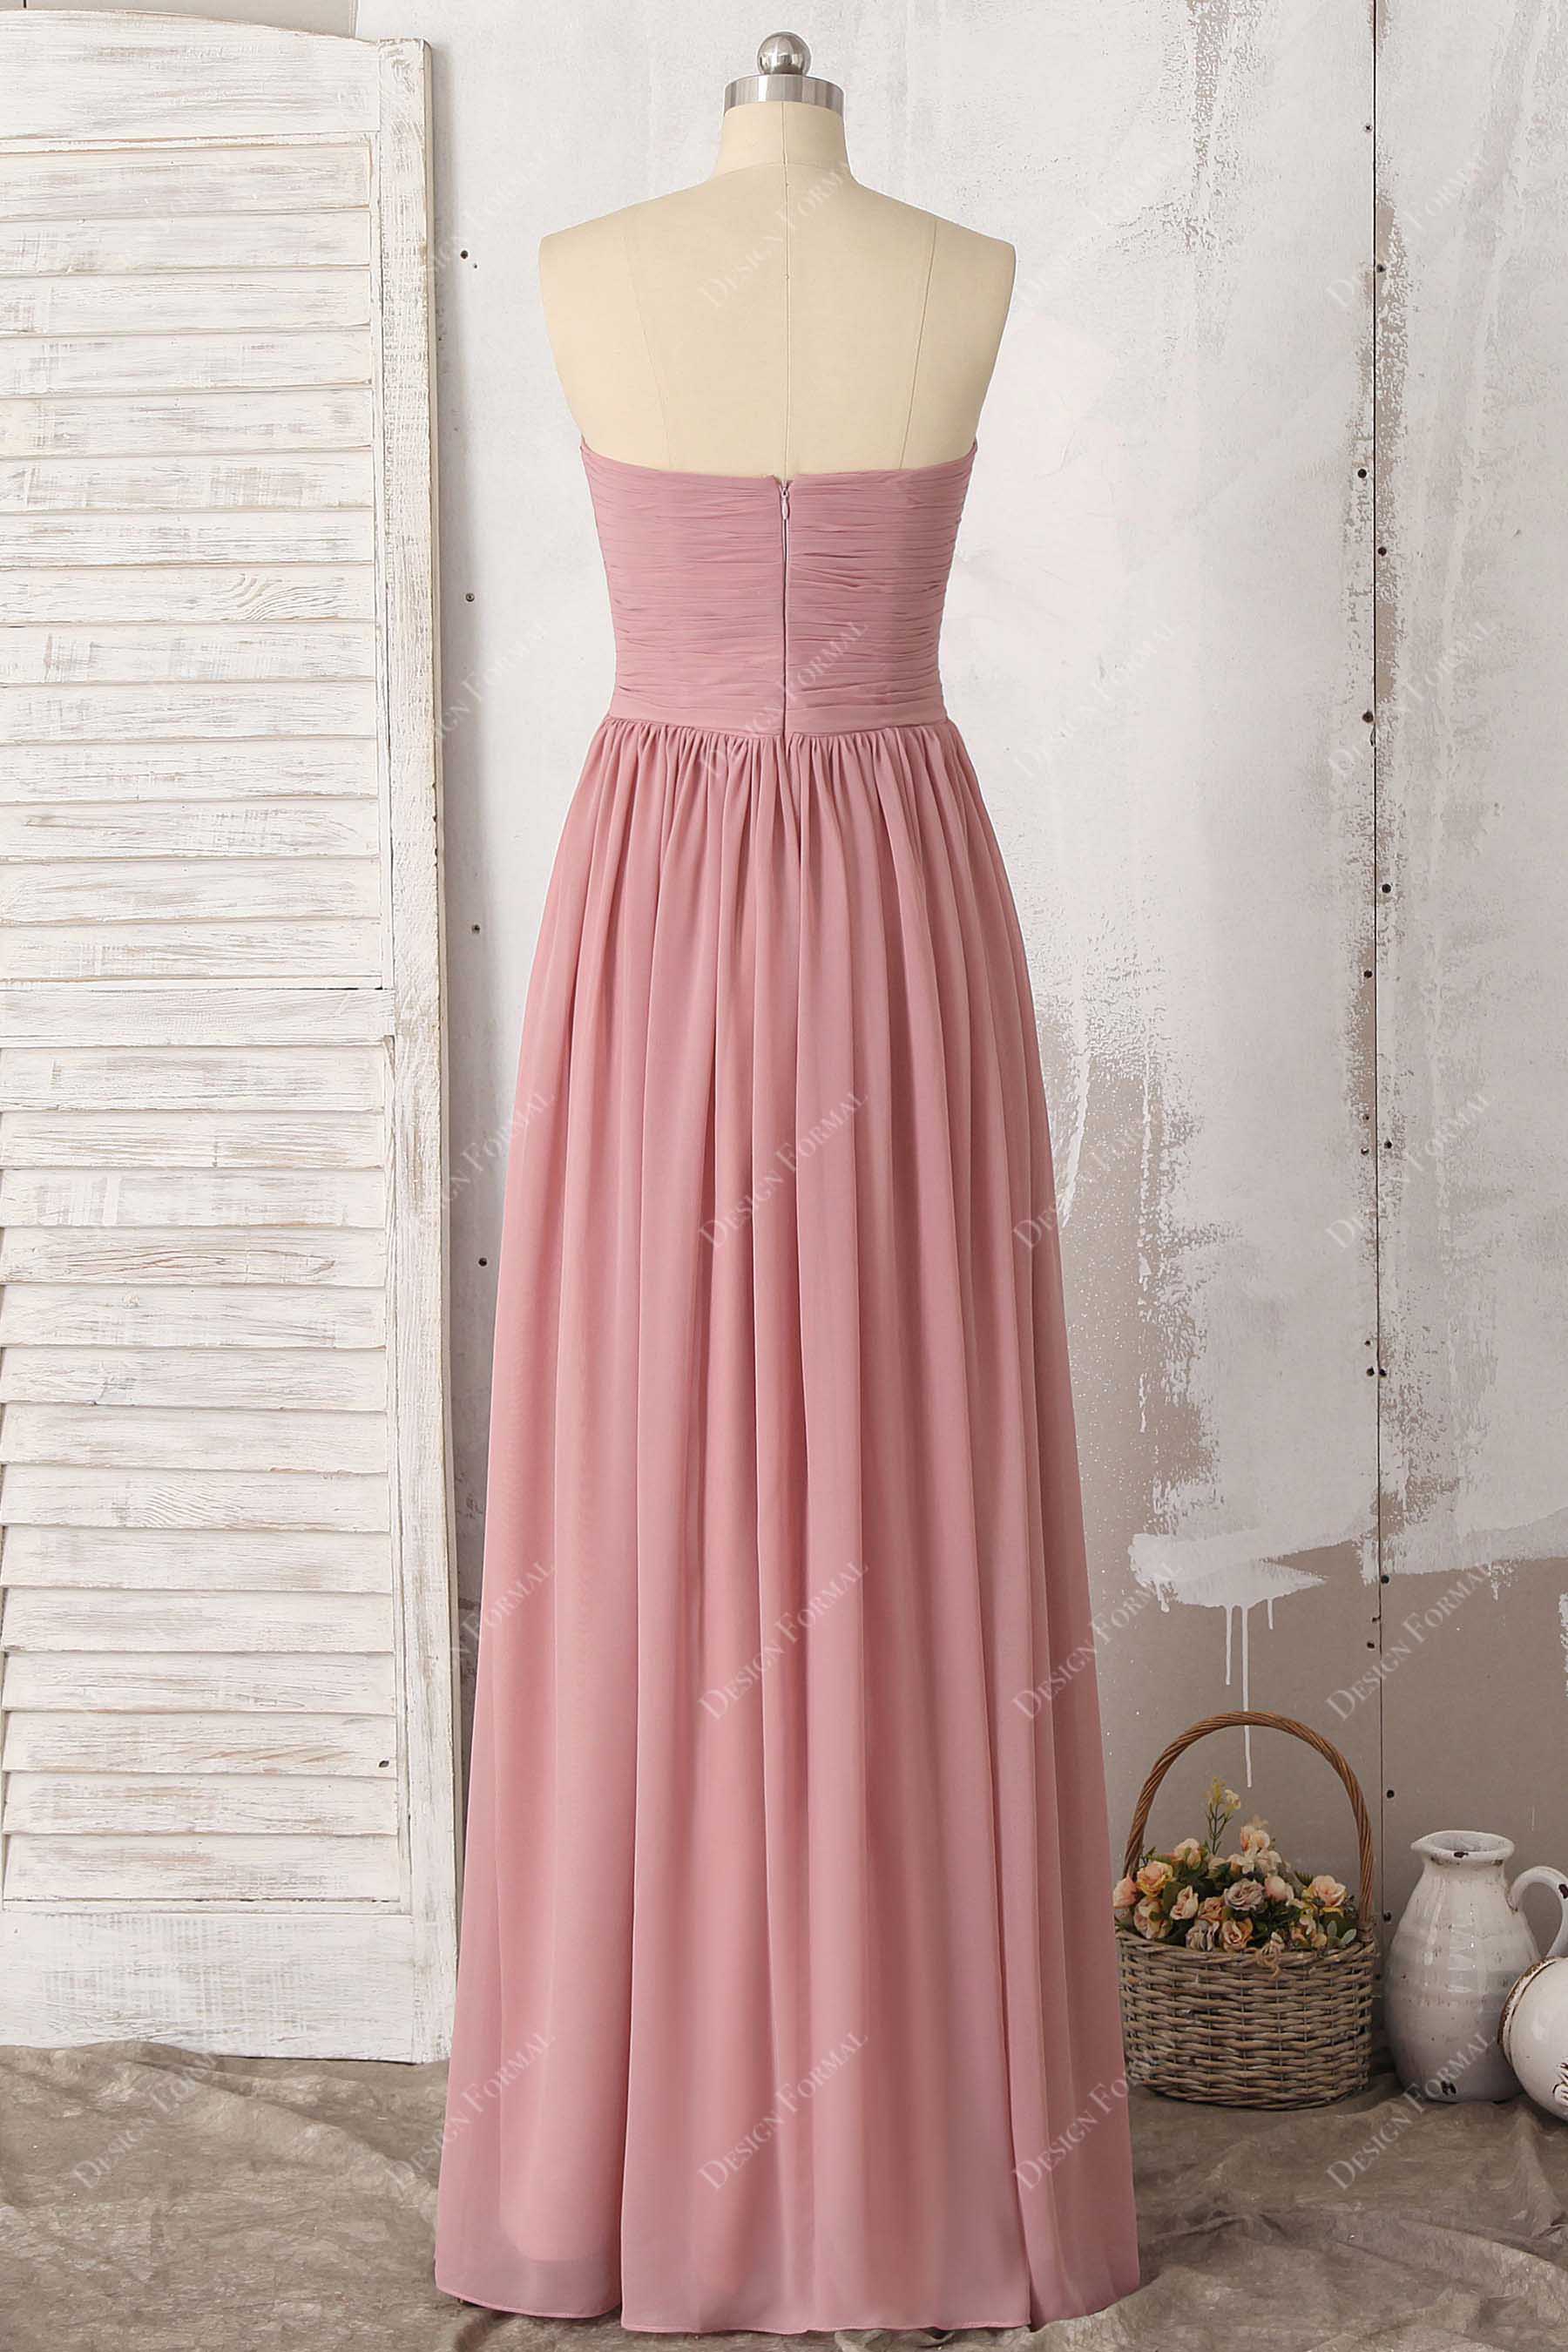 strapless A-line dusty pink bridesmaid dress